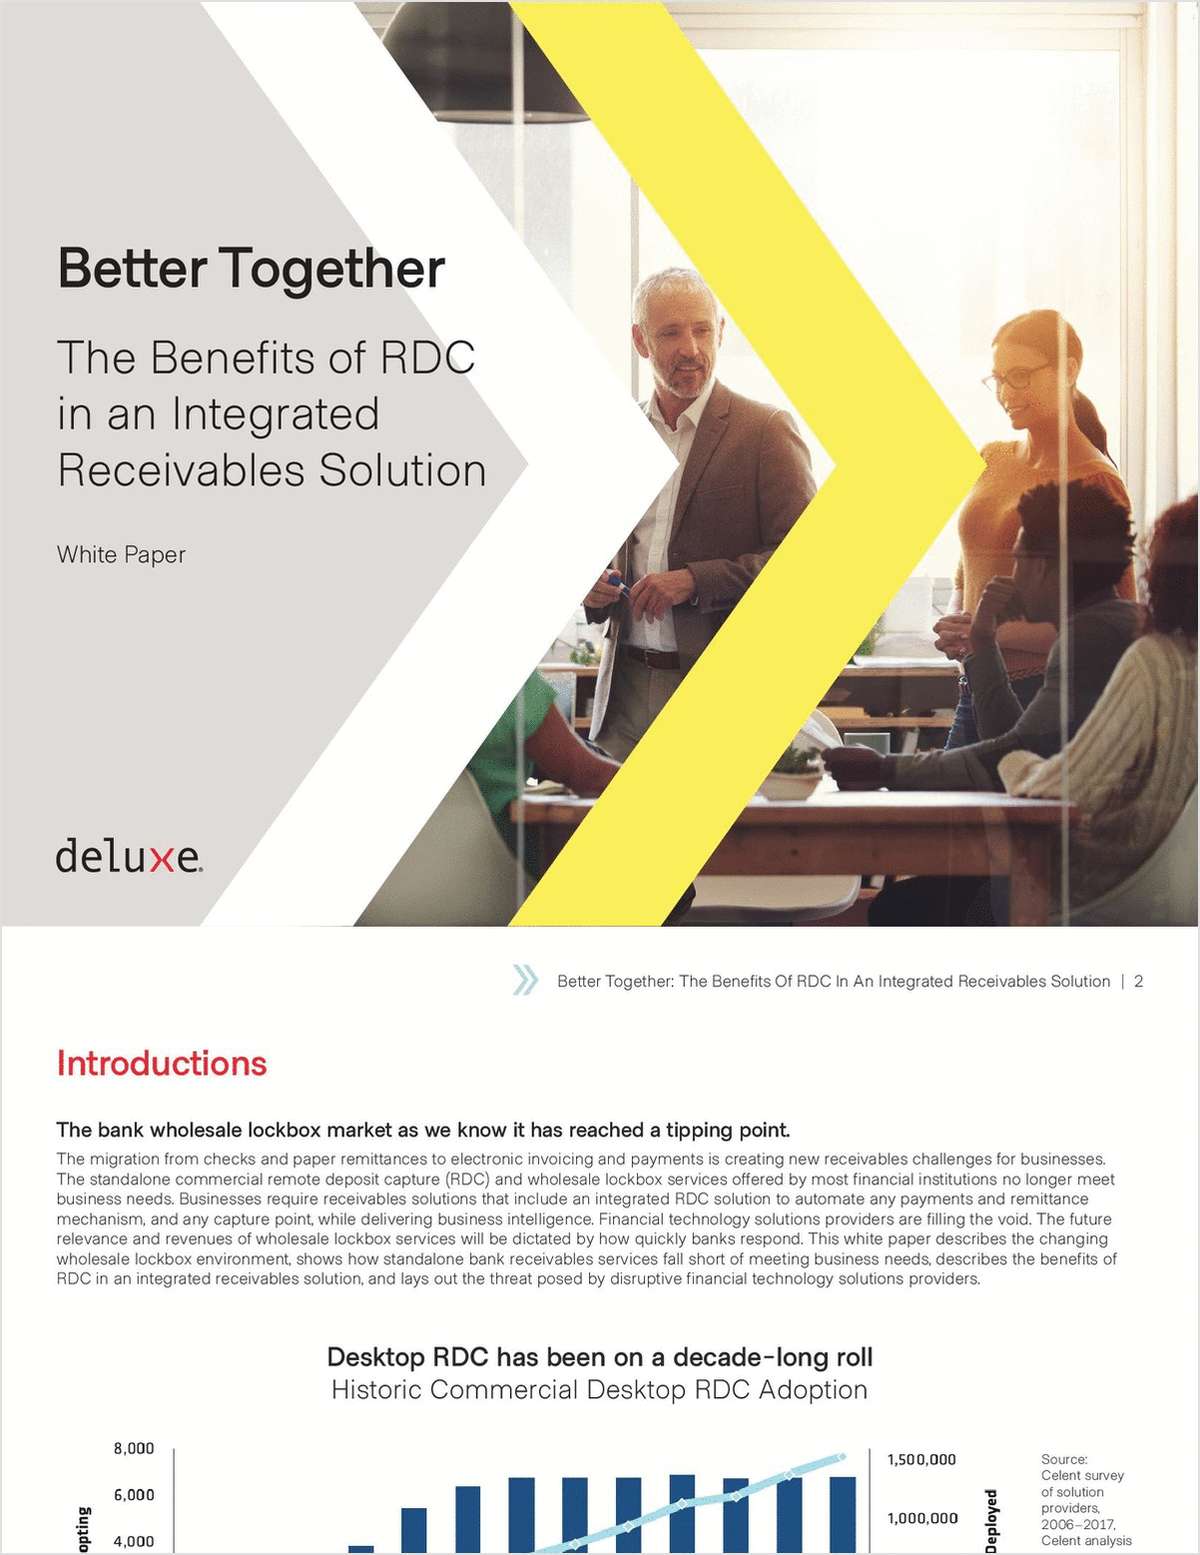 Better Together: The Benefits of RDC in an Integrated Receivables Solution